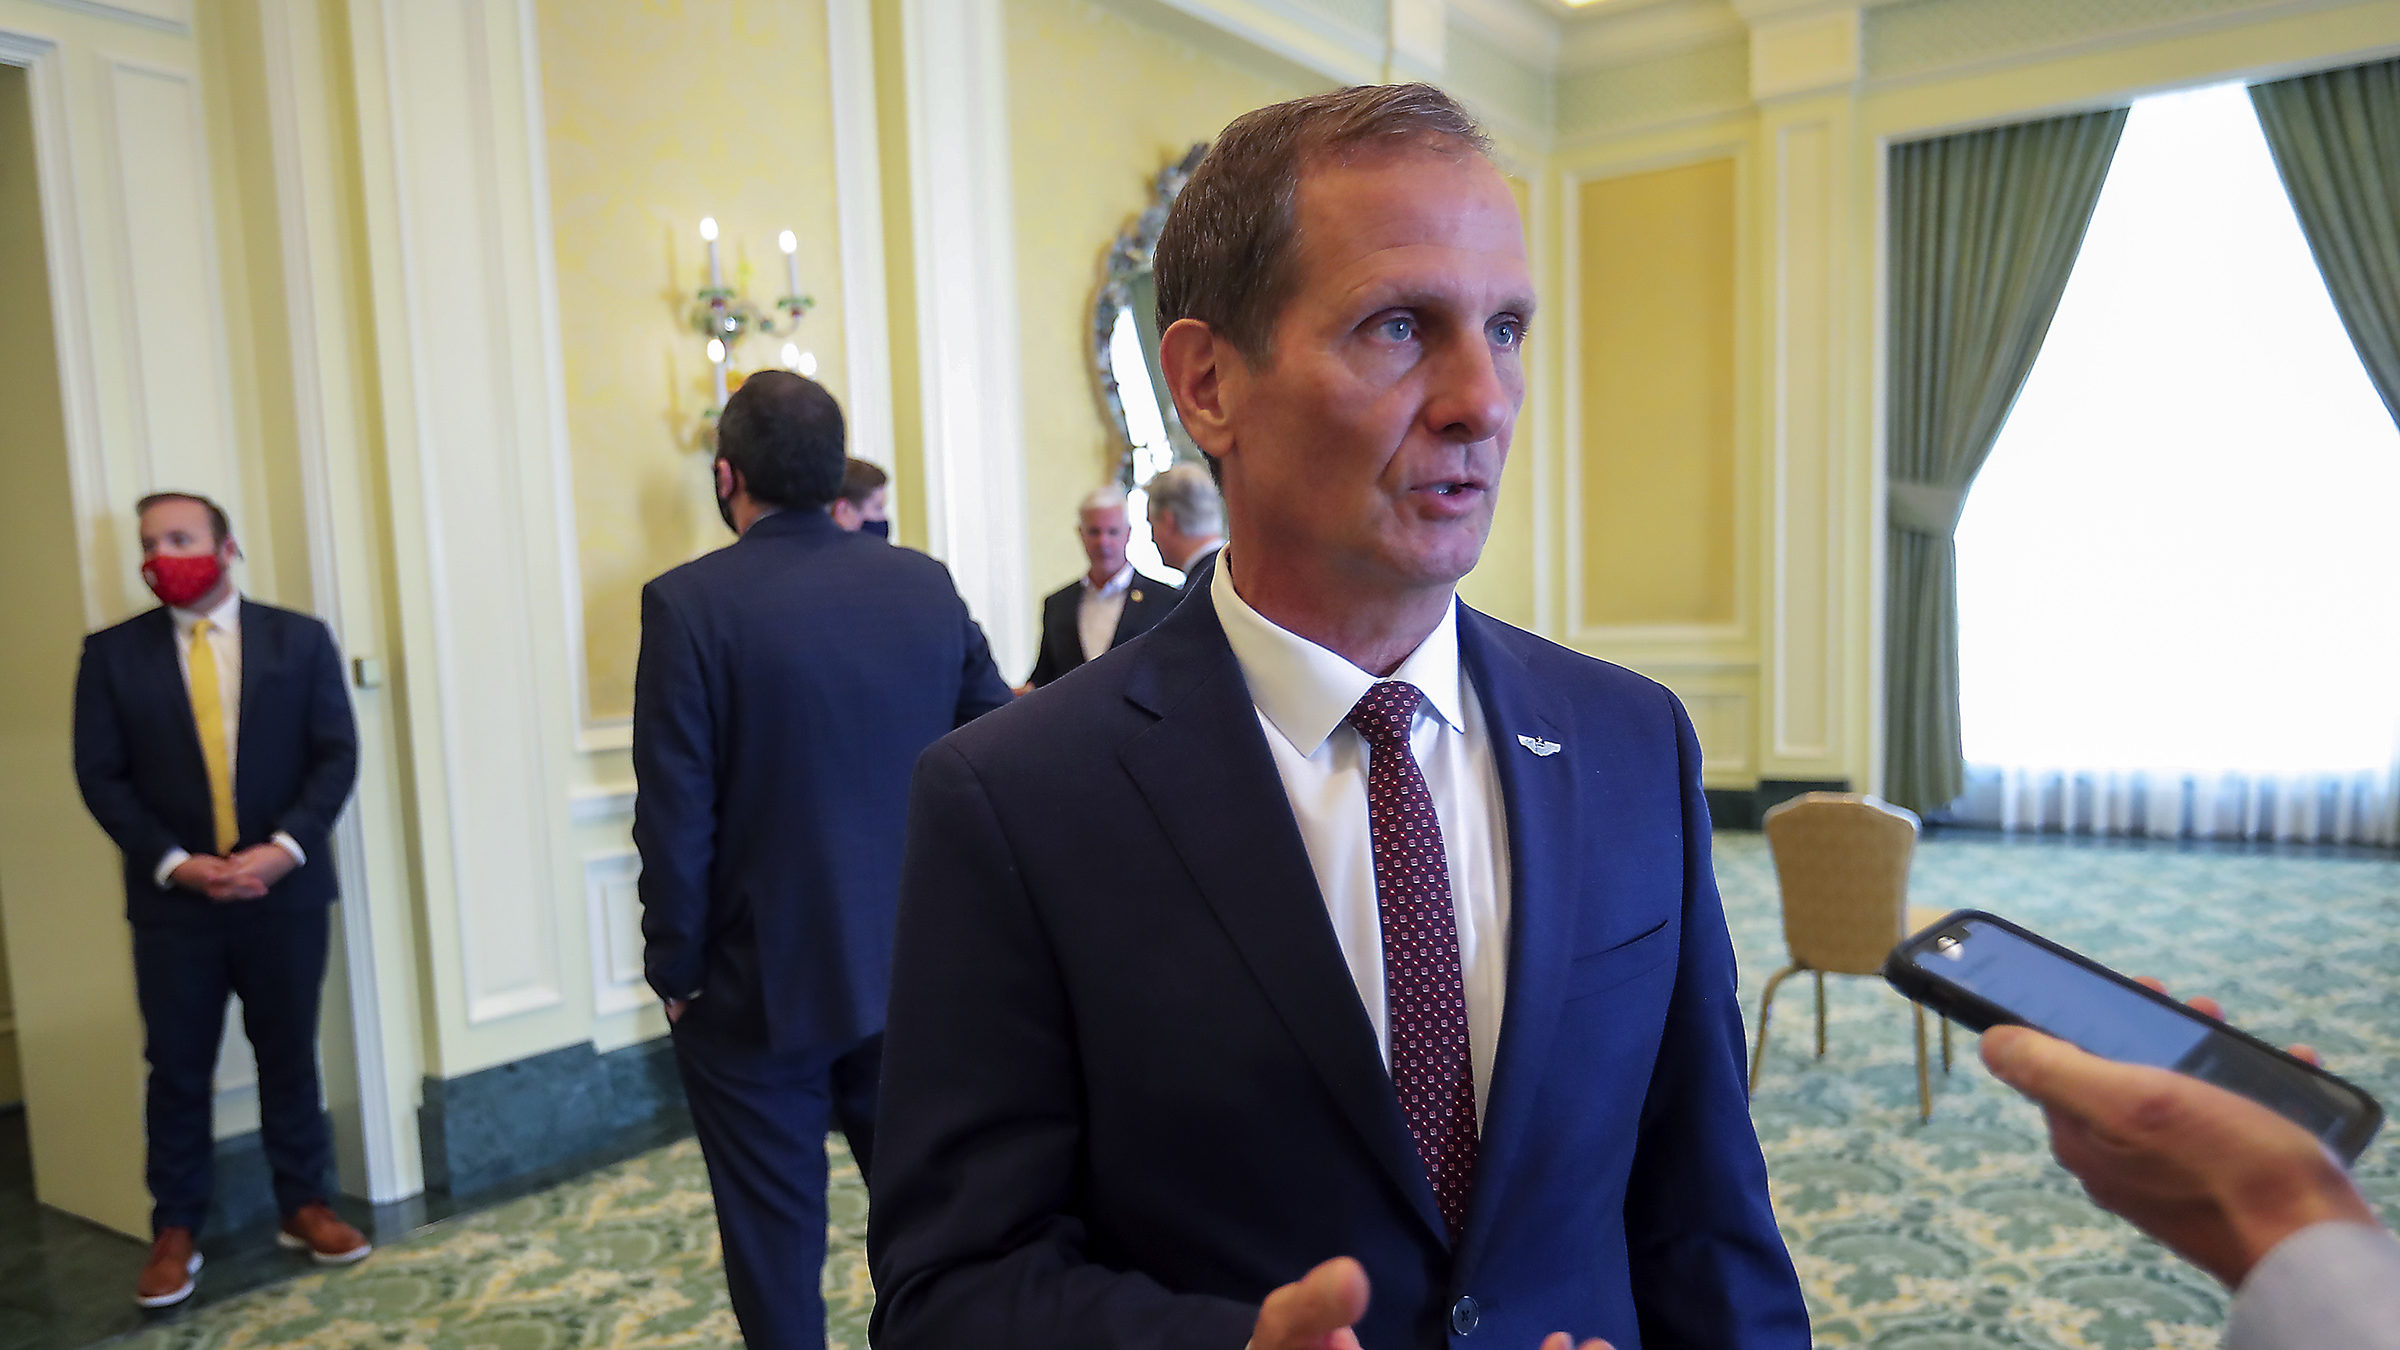 Rep. Chris Stewart, R-Utah, announced Wednesday that he is resigning his seat in the U.S. House ove...